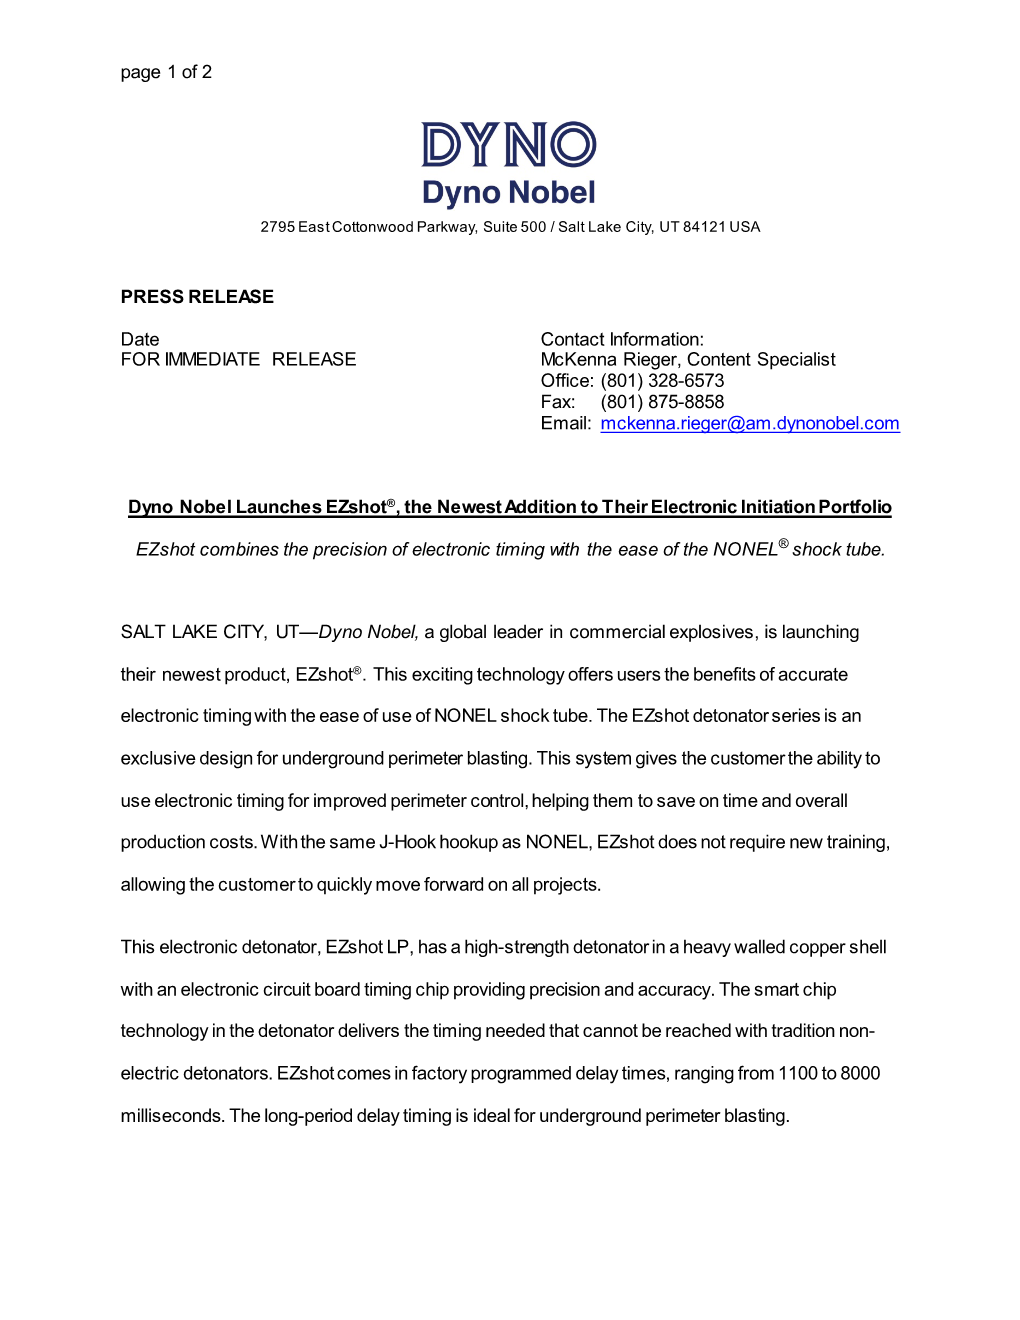 Page 1 of 2 PRESS RELEASE Date Contact Information: for IMMEDIATE RELEASE Mckenna Rieger, Content Specialist Office: (801) 32